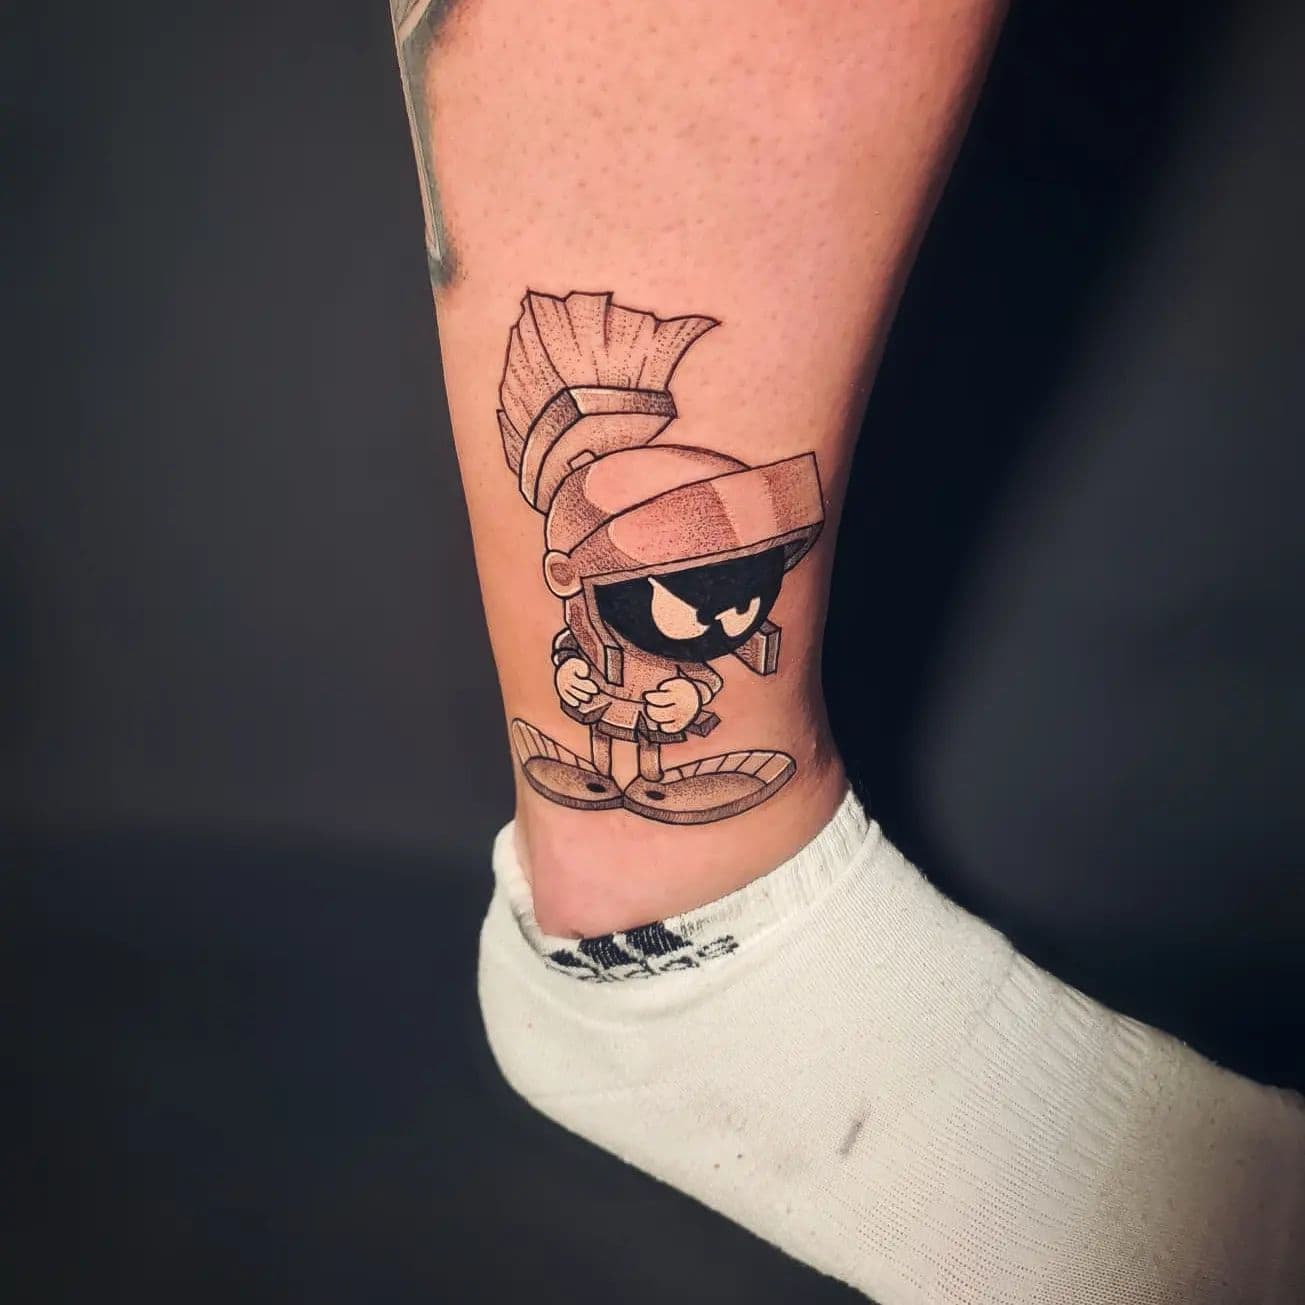 Marvin the Martian done by Chris Lopp at Absolute  INKPEDIA